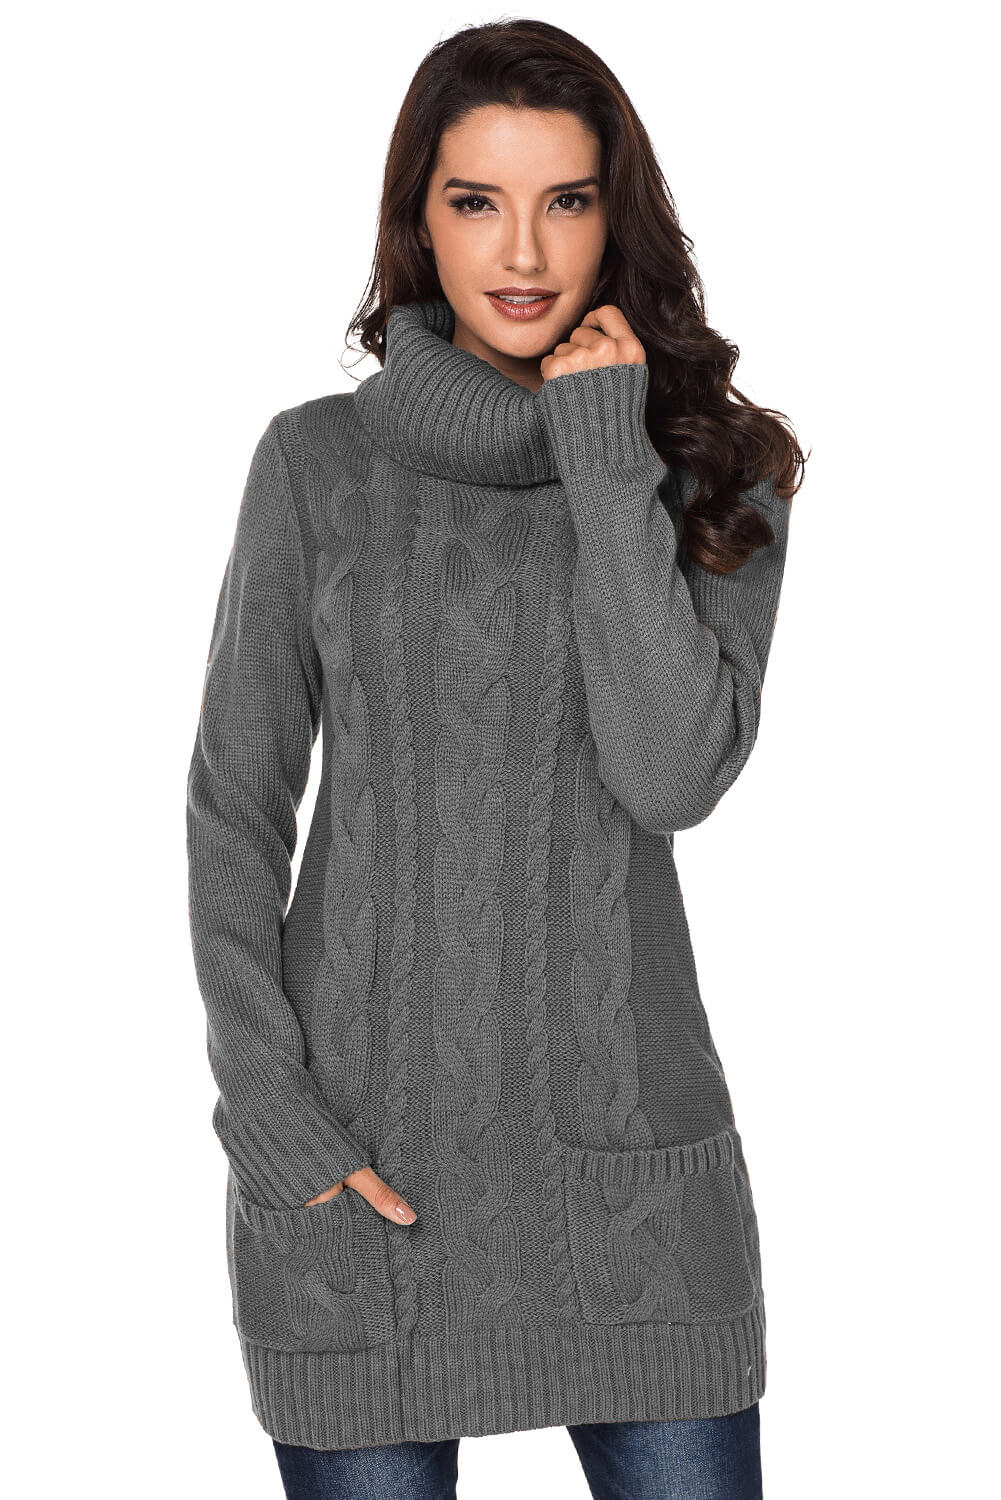 Colorblock Cowl Neck Cable Knit Sweater Dress